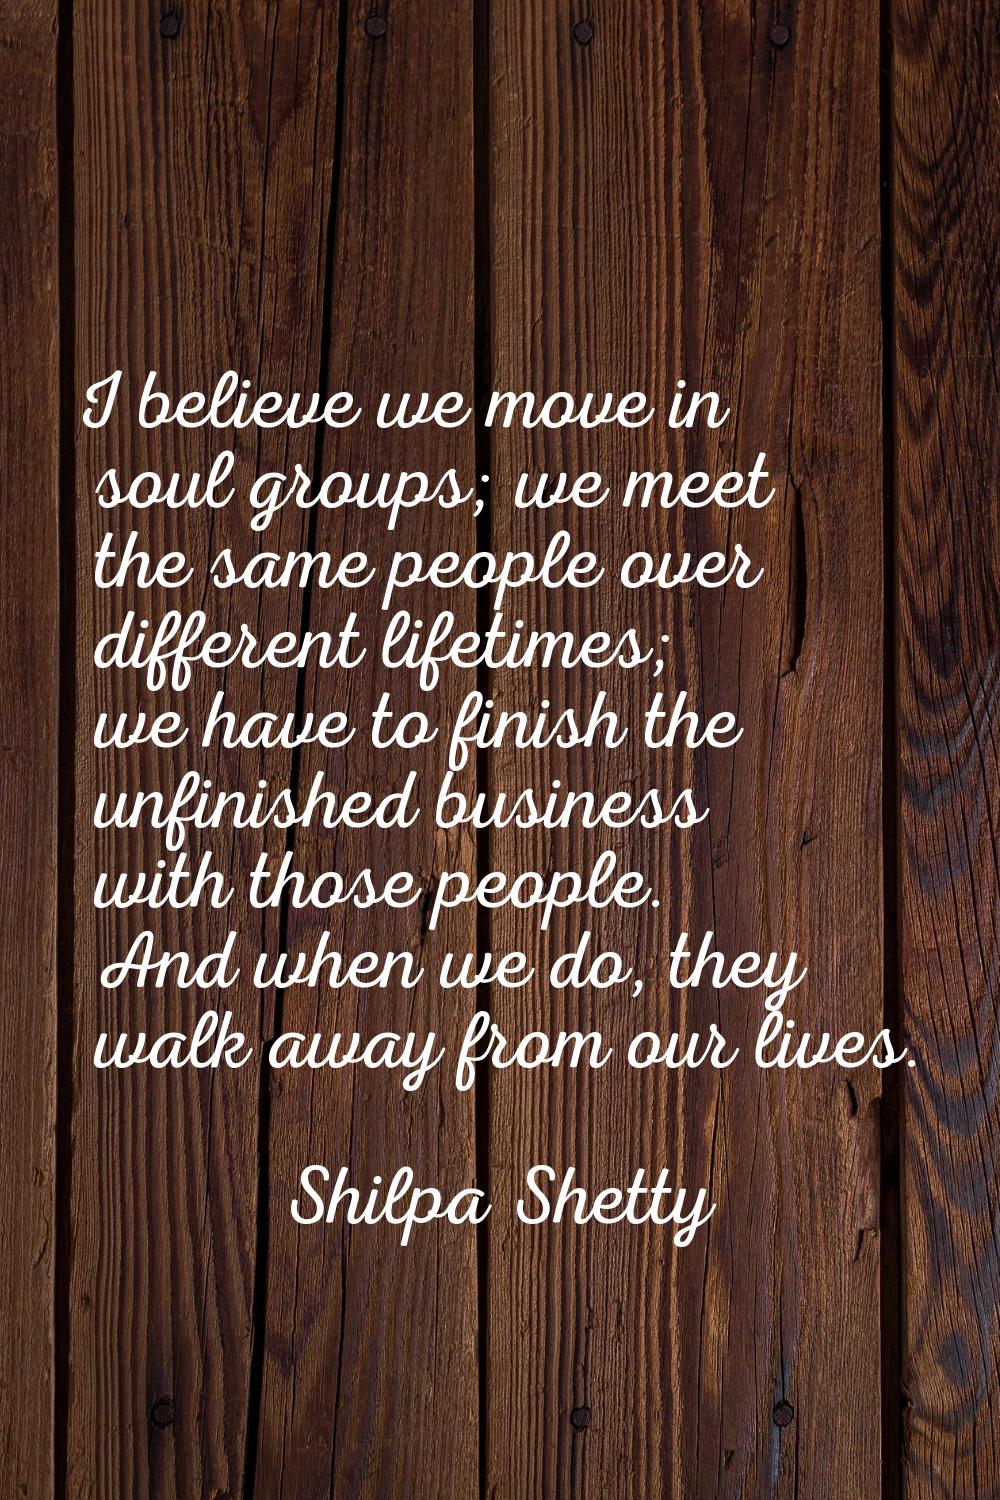 I believe we move in soul groups; we meet the same people over different lifetimes; we have to fini